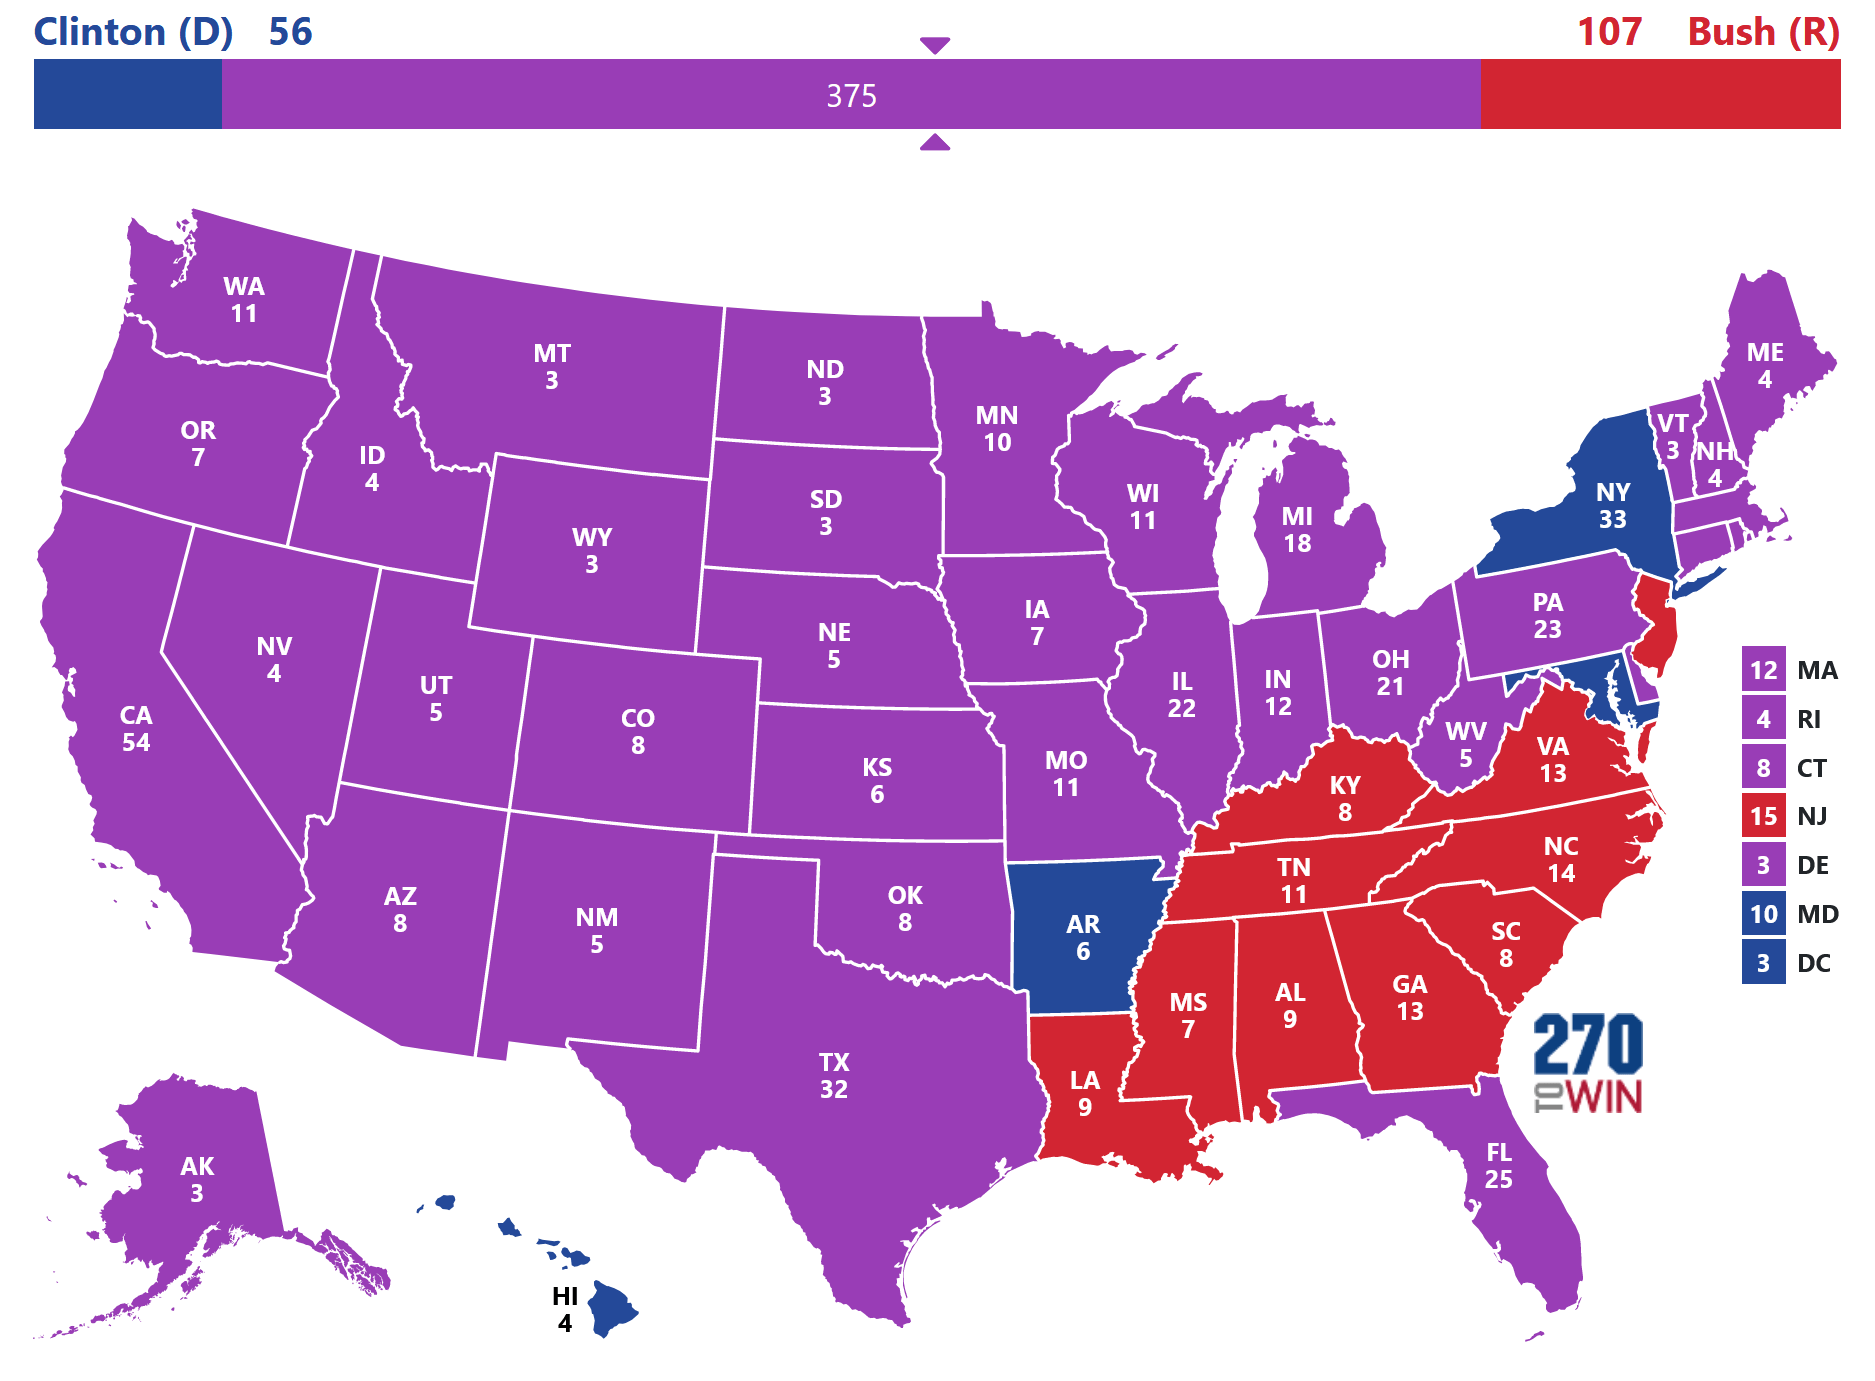 Perot's best-case electoral map assuming an elastic swing.